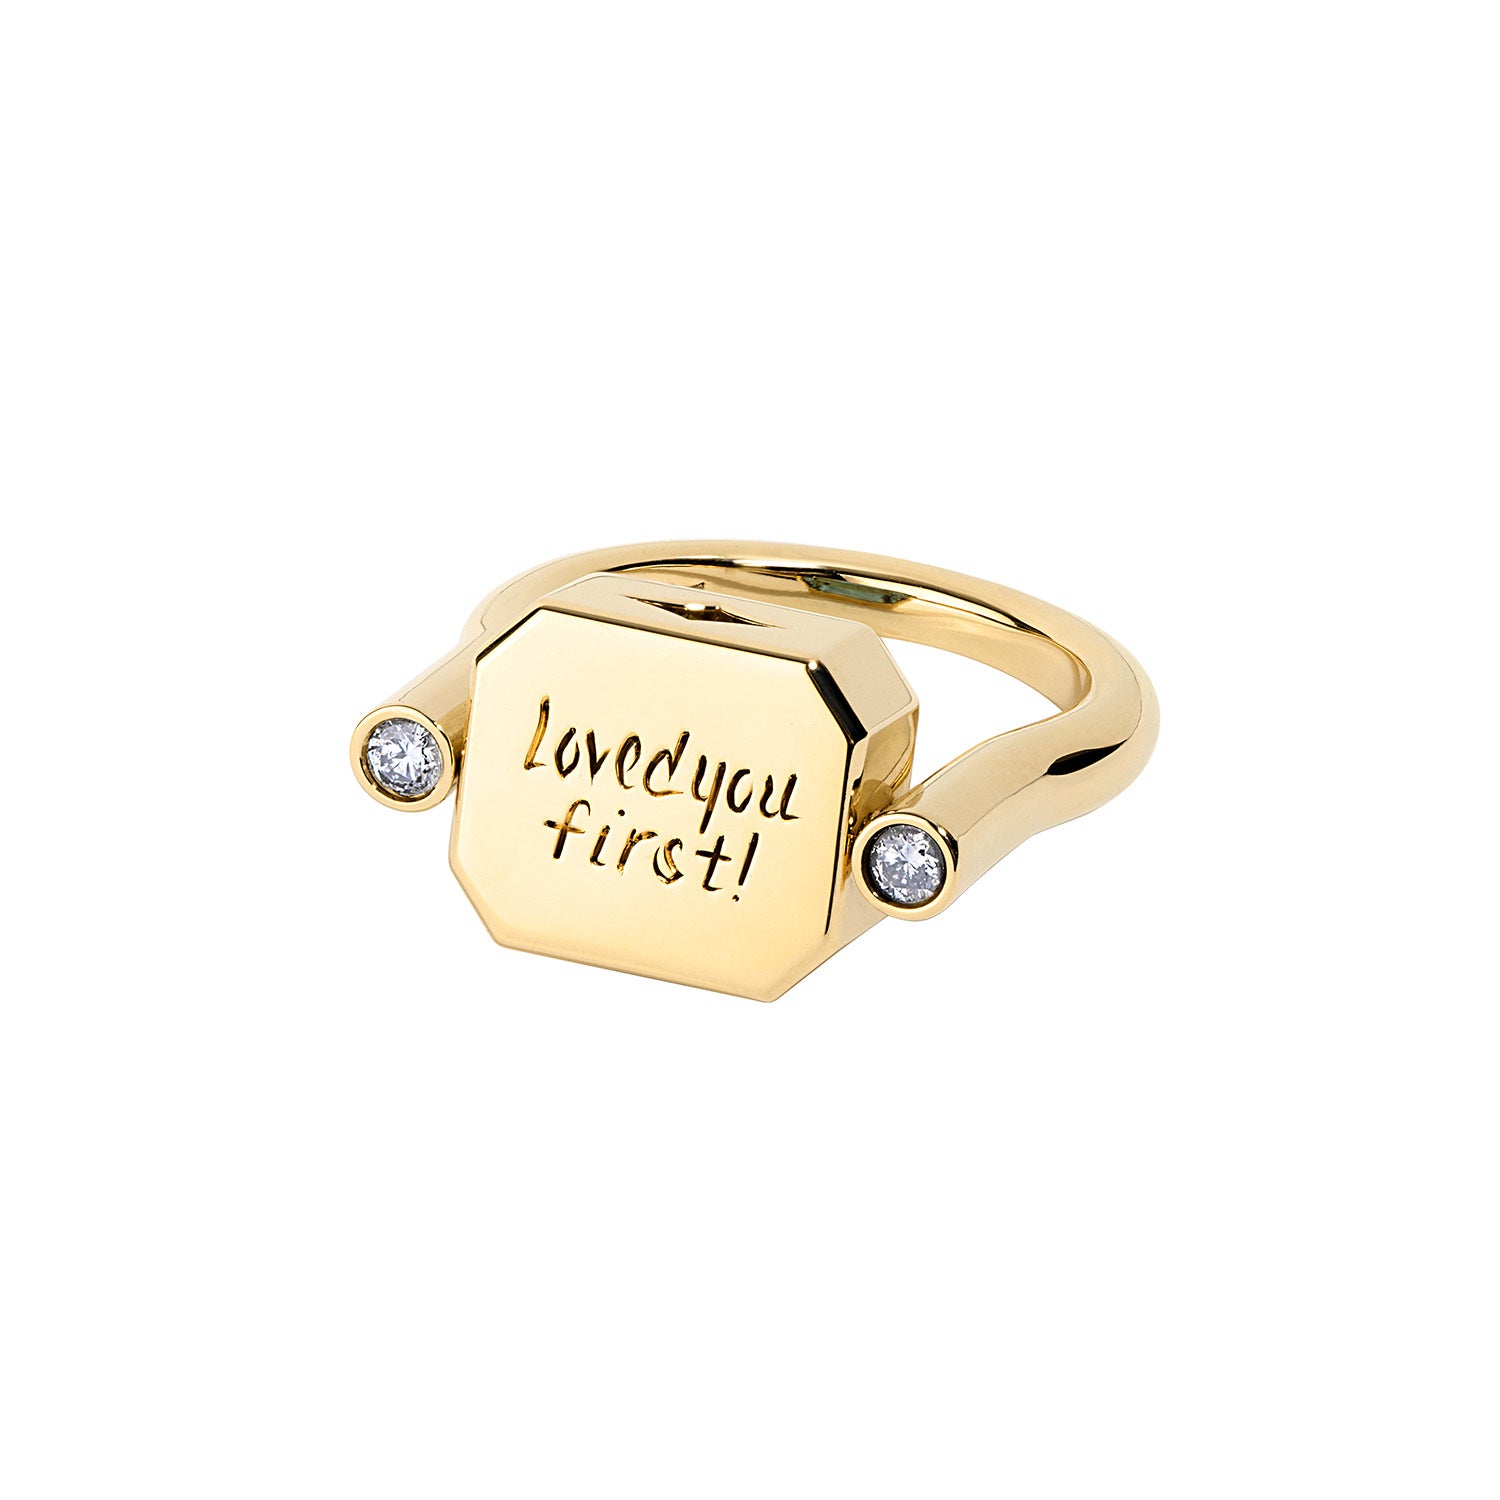 Yellow gold signet ring engraved with the phrase 'Loved you first!' flanked by two small diamonds.